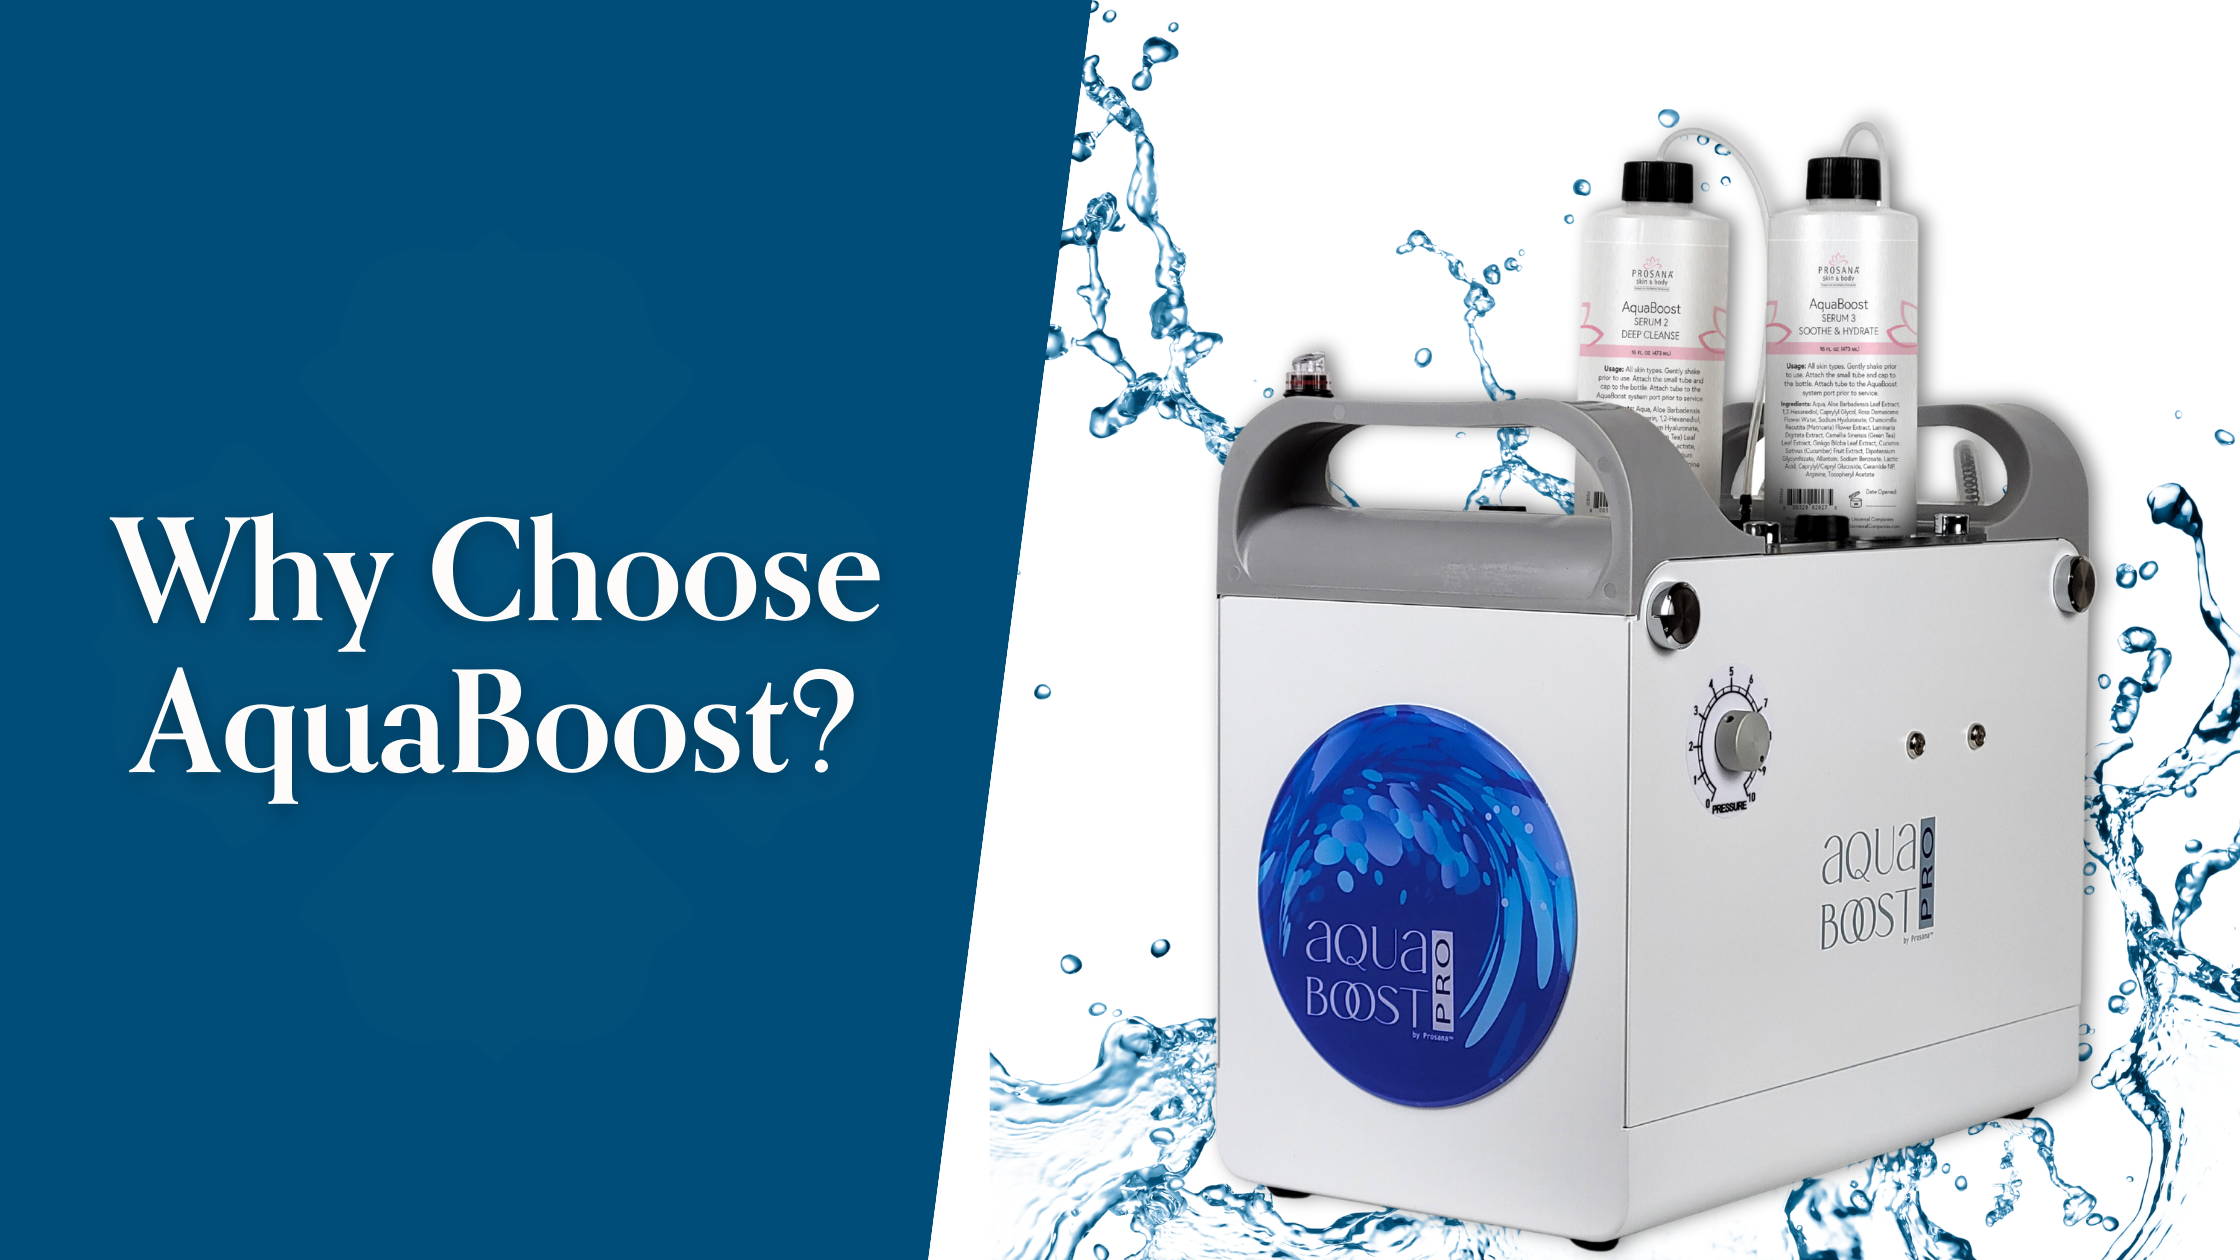 https://www.universalcompanies.com/blogs/uco-insights/why-choose-the-aquaboost-hydradermabrasion-system